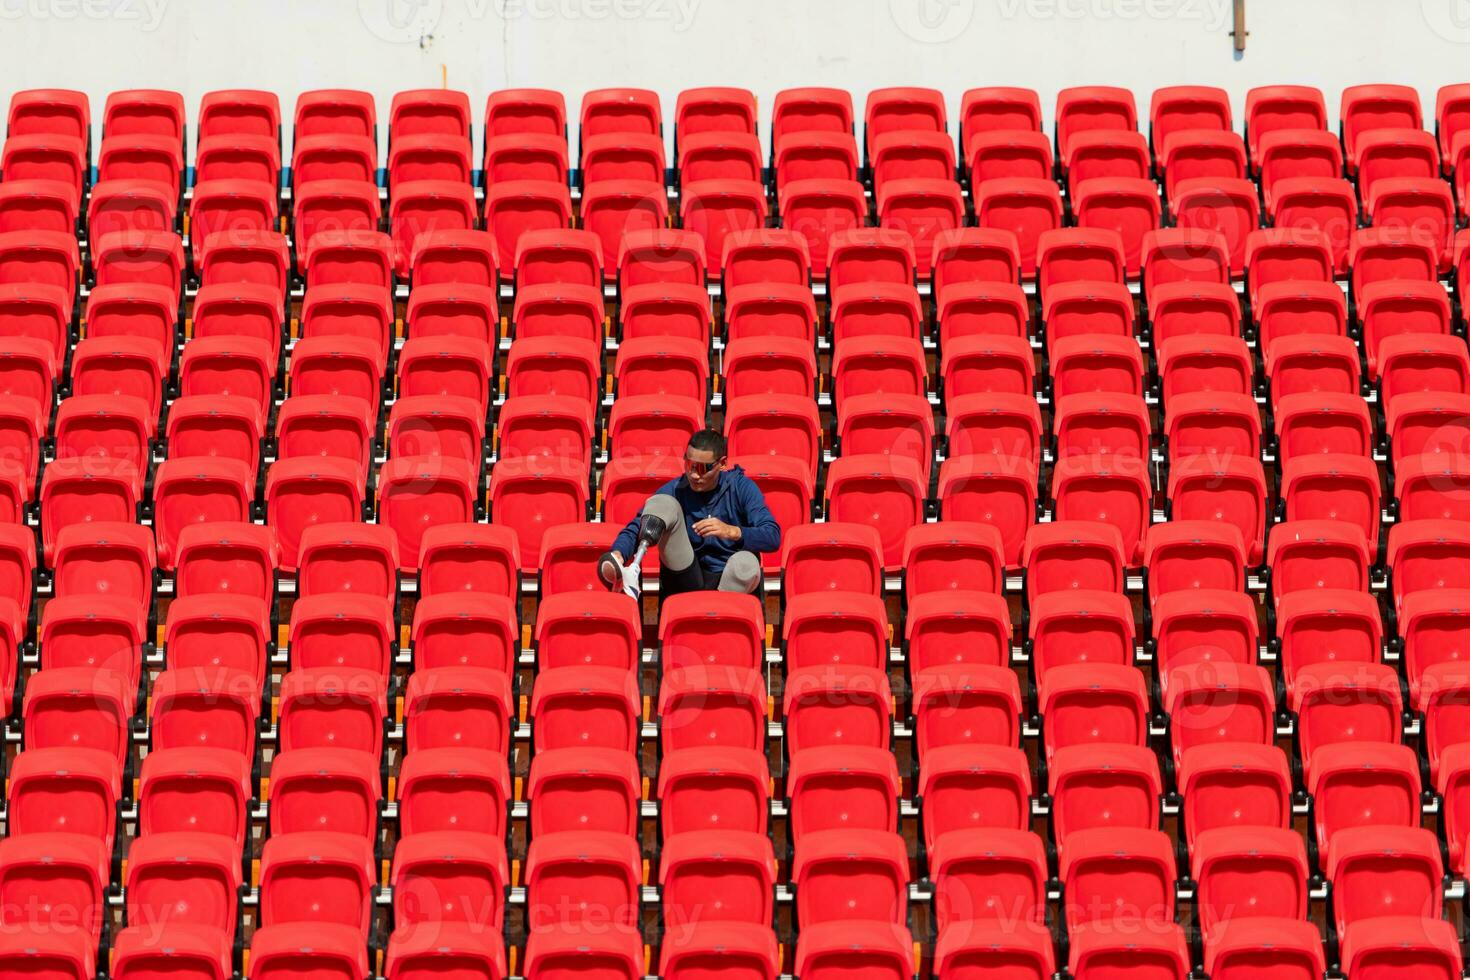 Disabled athletes in a blue shirt sitting on the red seats at the stadium, Prepare for running training. photo